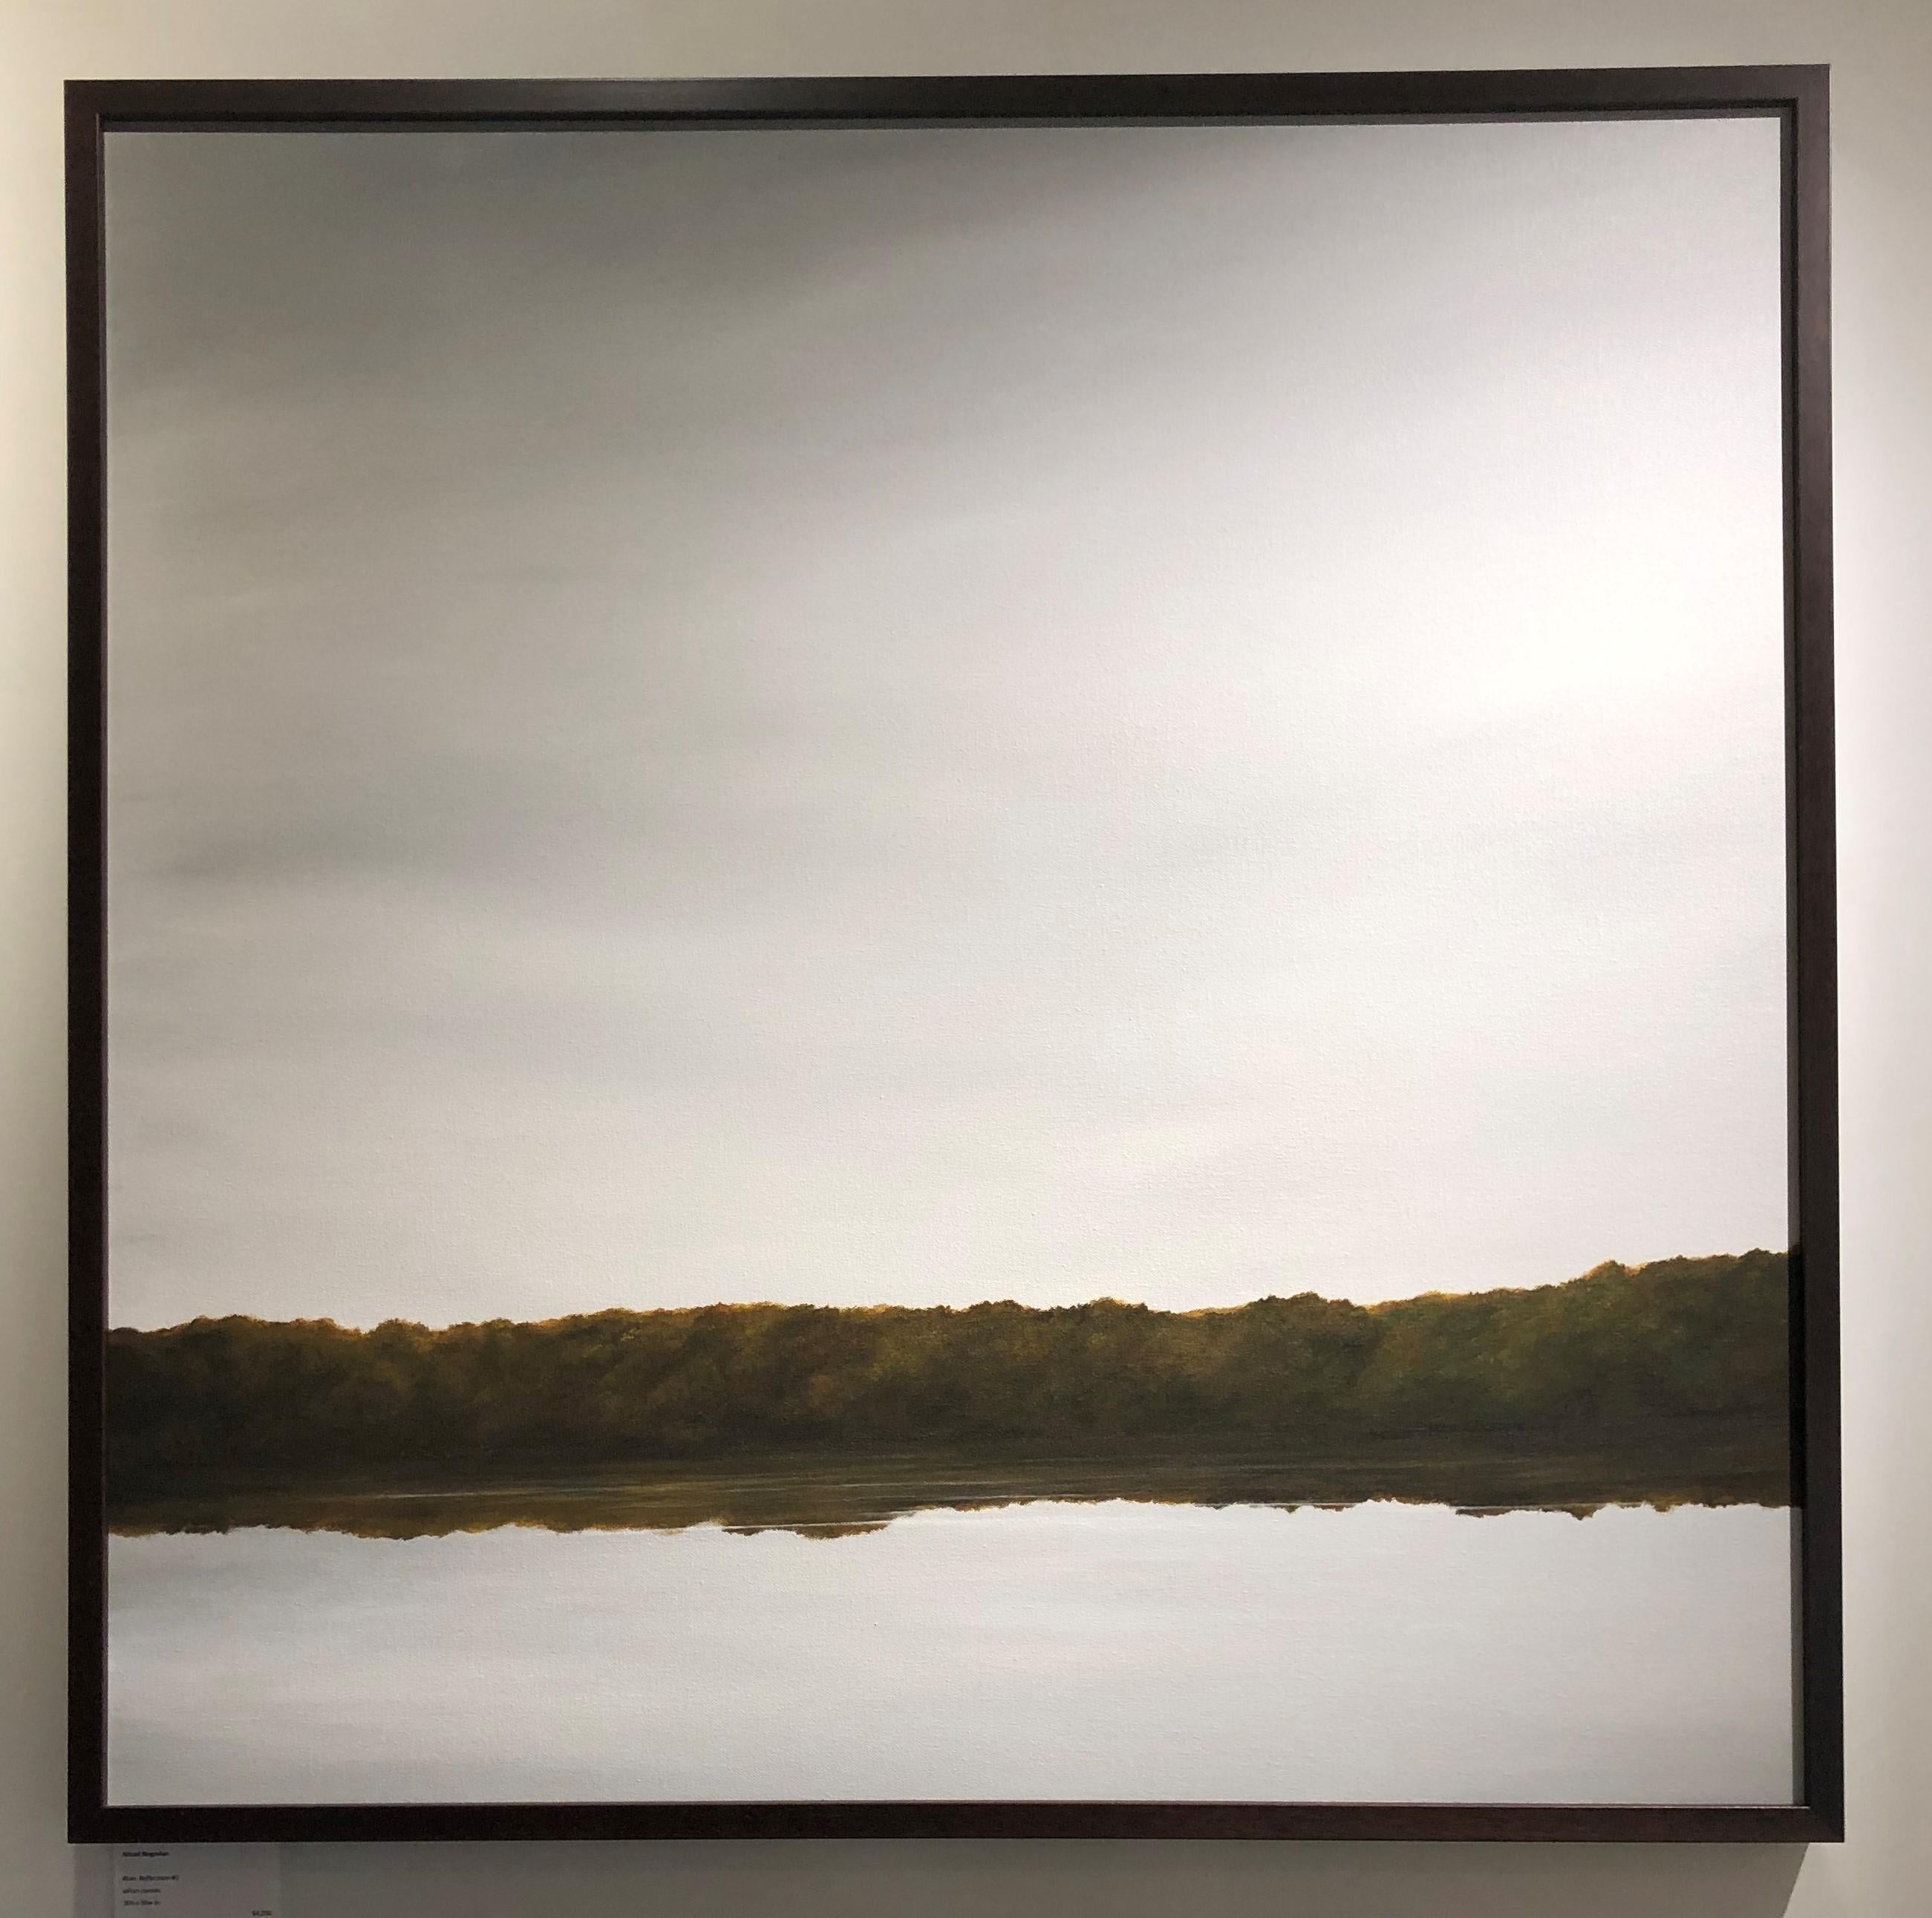 River Reflections #2 - Minimalist Oil Painting of Gray Sky Reflected in Water (Grau), Landscape Painting, von Ahzad Bogosian